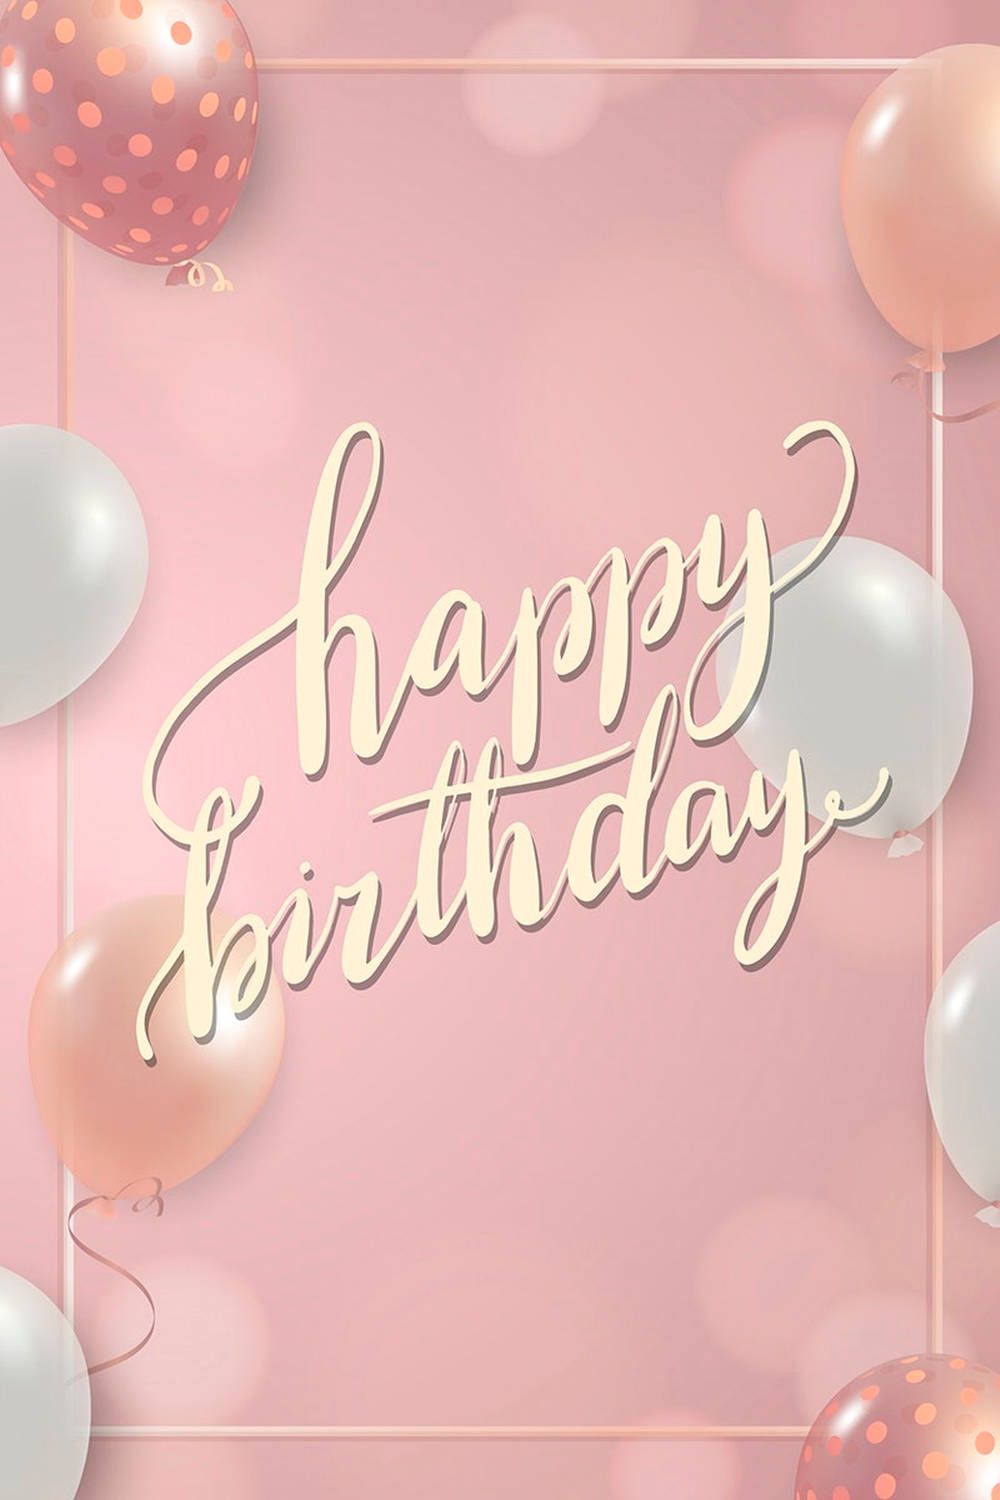 A pink birthday card with balloons and the words 